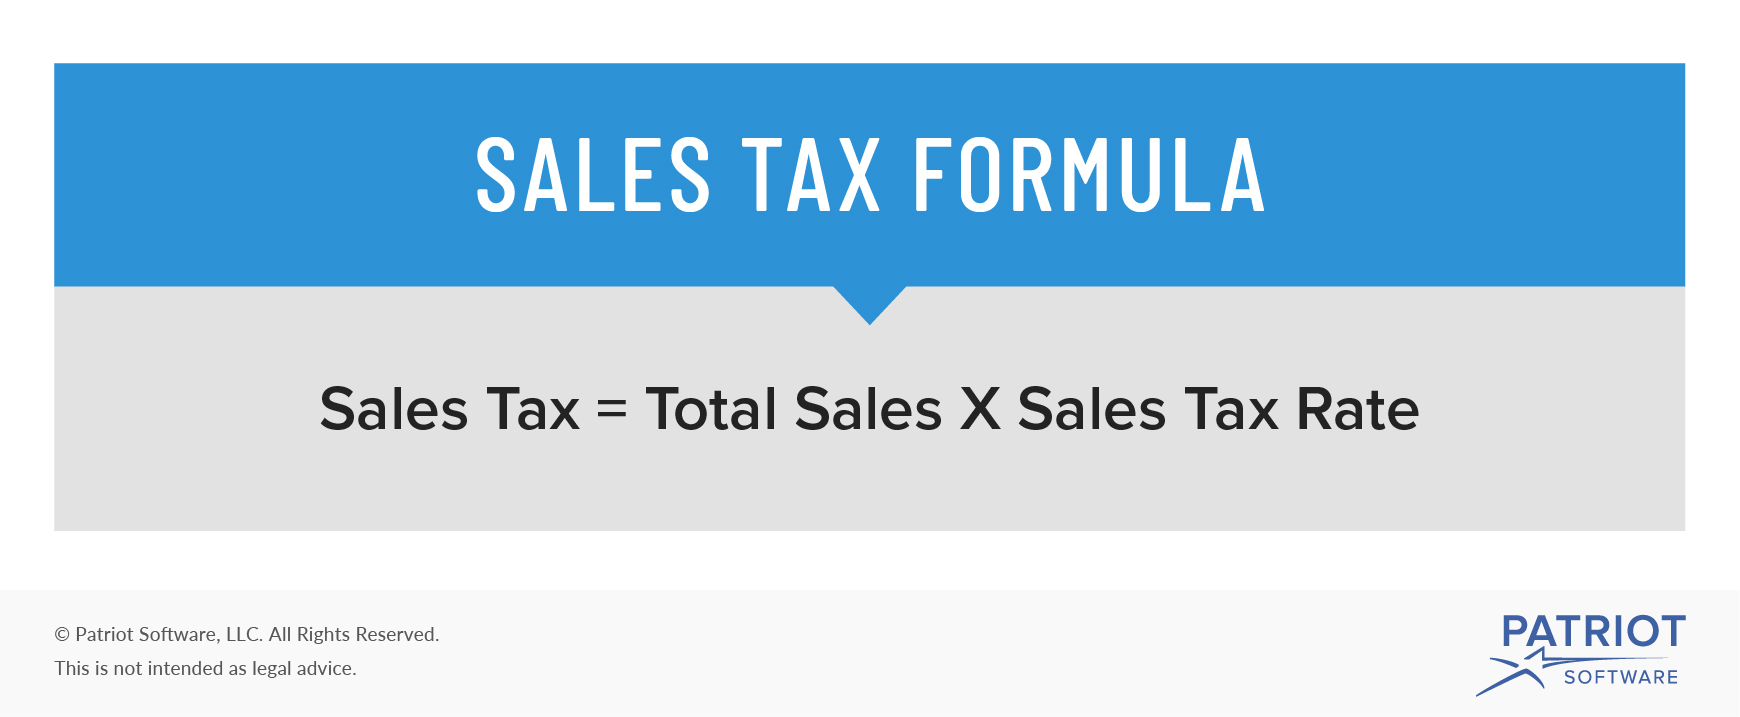 How to calculate sales tax